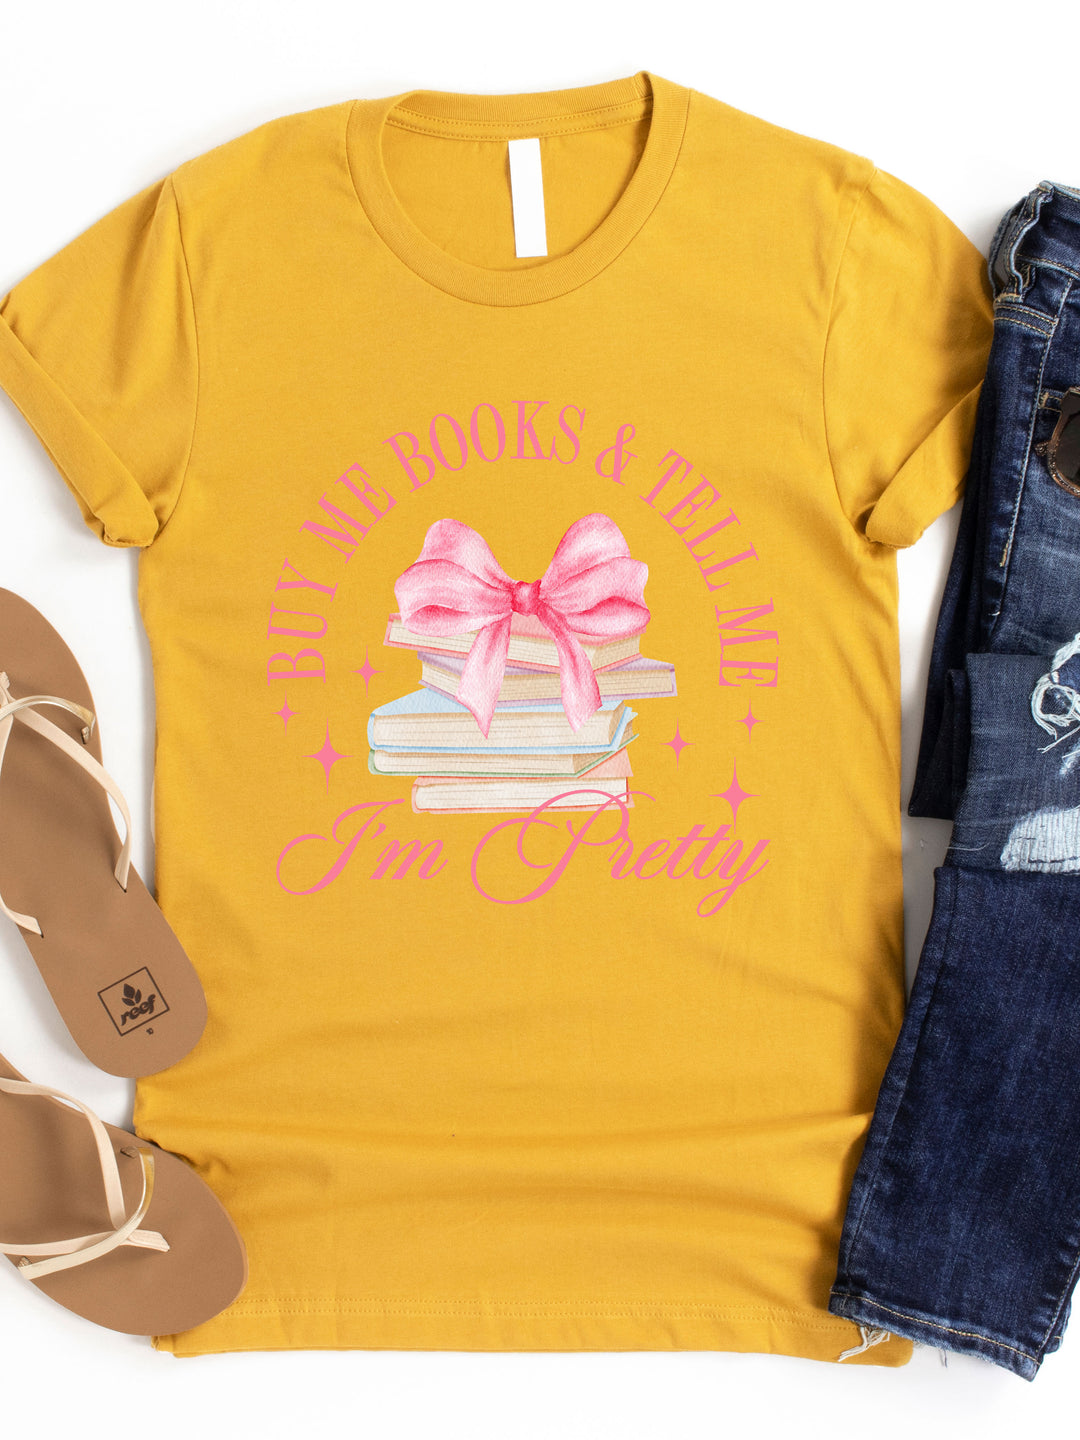 Buy Me Books and Tell Me I'm Pretty - Graphic Tee